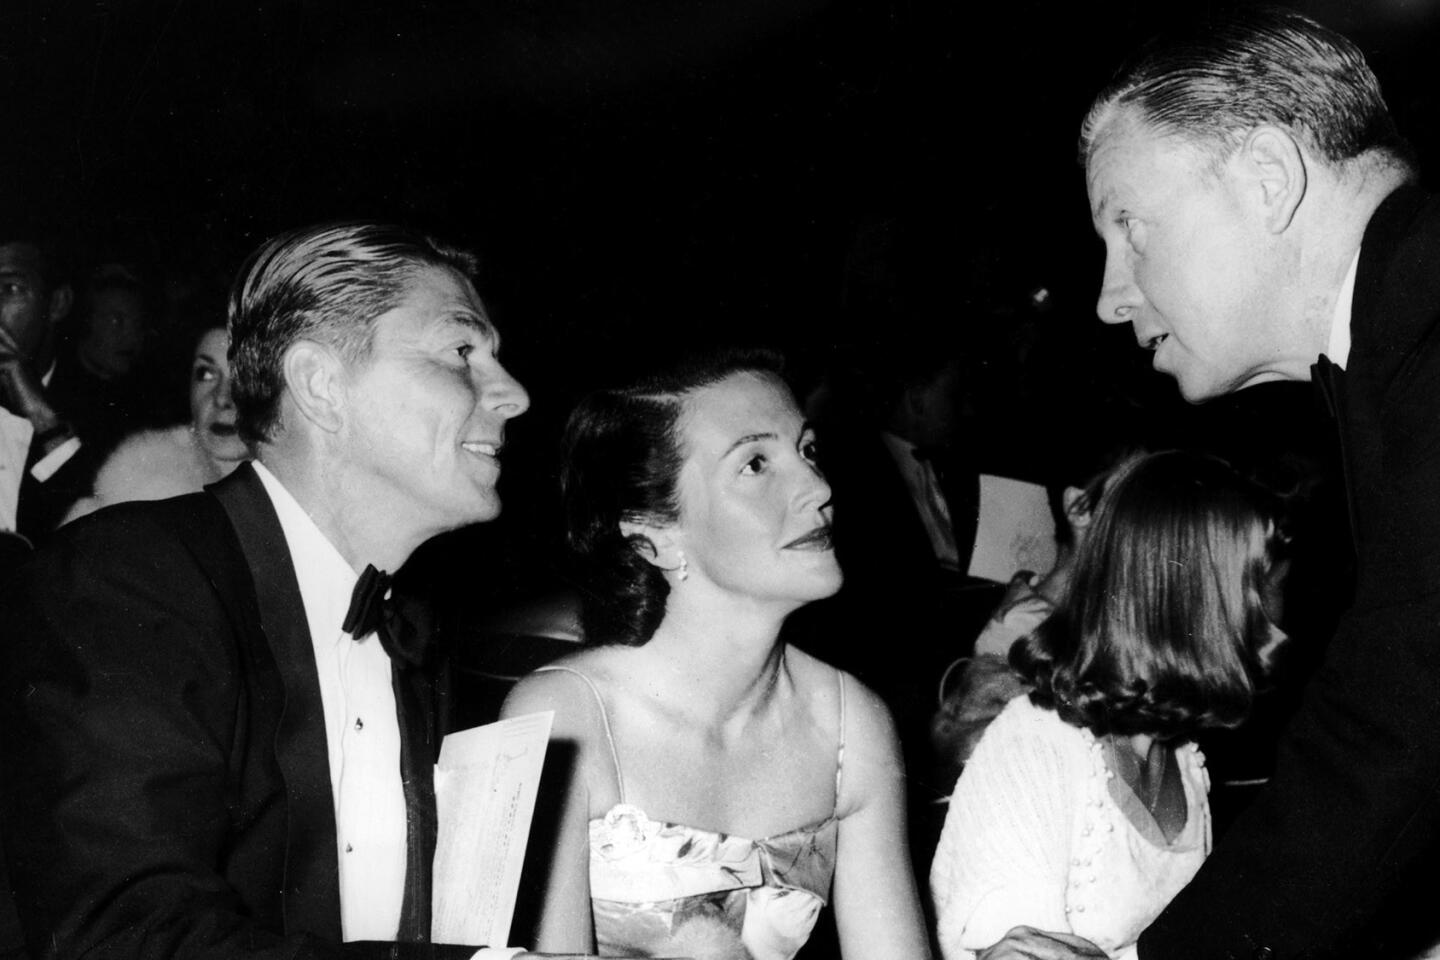 American actor and future president Ronald Reagan (1911 - 2004) sits with his wife, actress Nancy Reagan, as the par talk with fellow actor and future US Senator George Murphy (1902 - 1992) at the premiere of 'High Society,' July 1956. (Photo by Pictorial Parade/Getty Images)